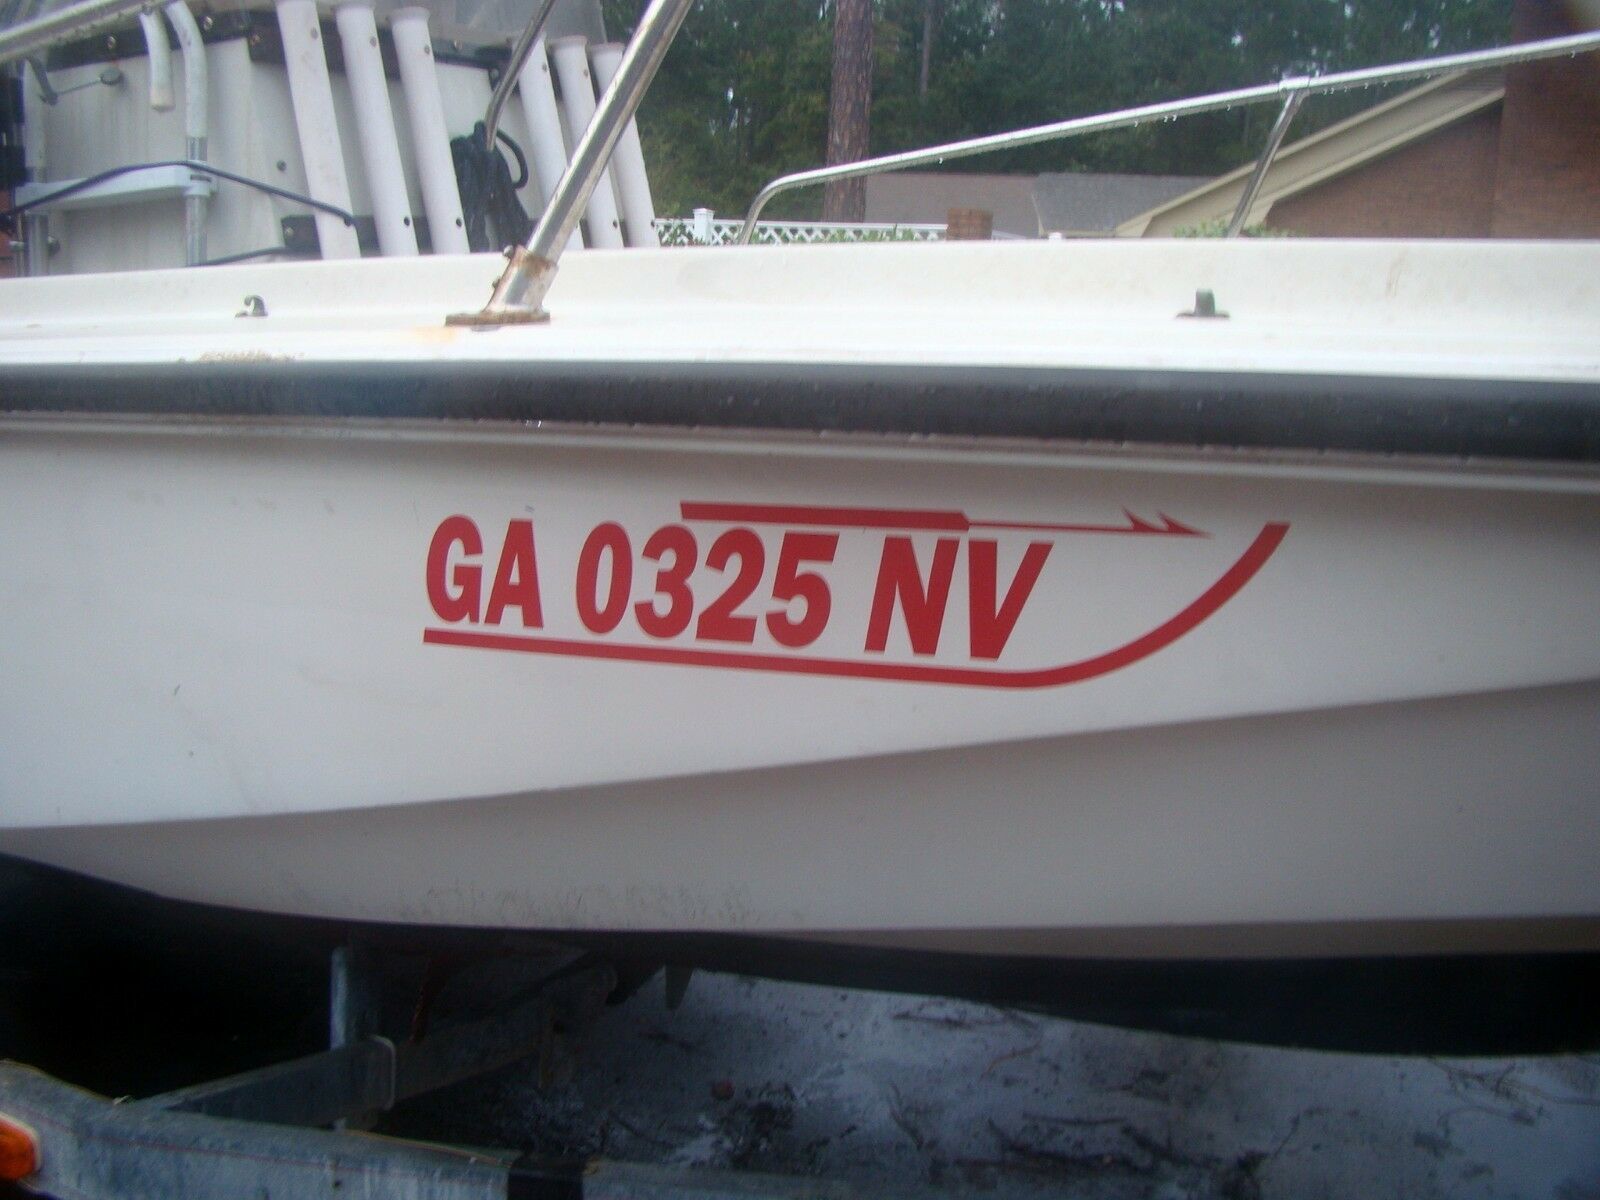 BOSTON WHALER font custom boat hull REGISTRATION NUMBERS decals made to order